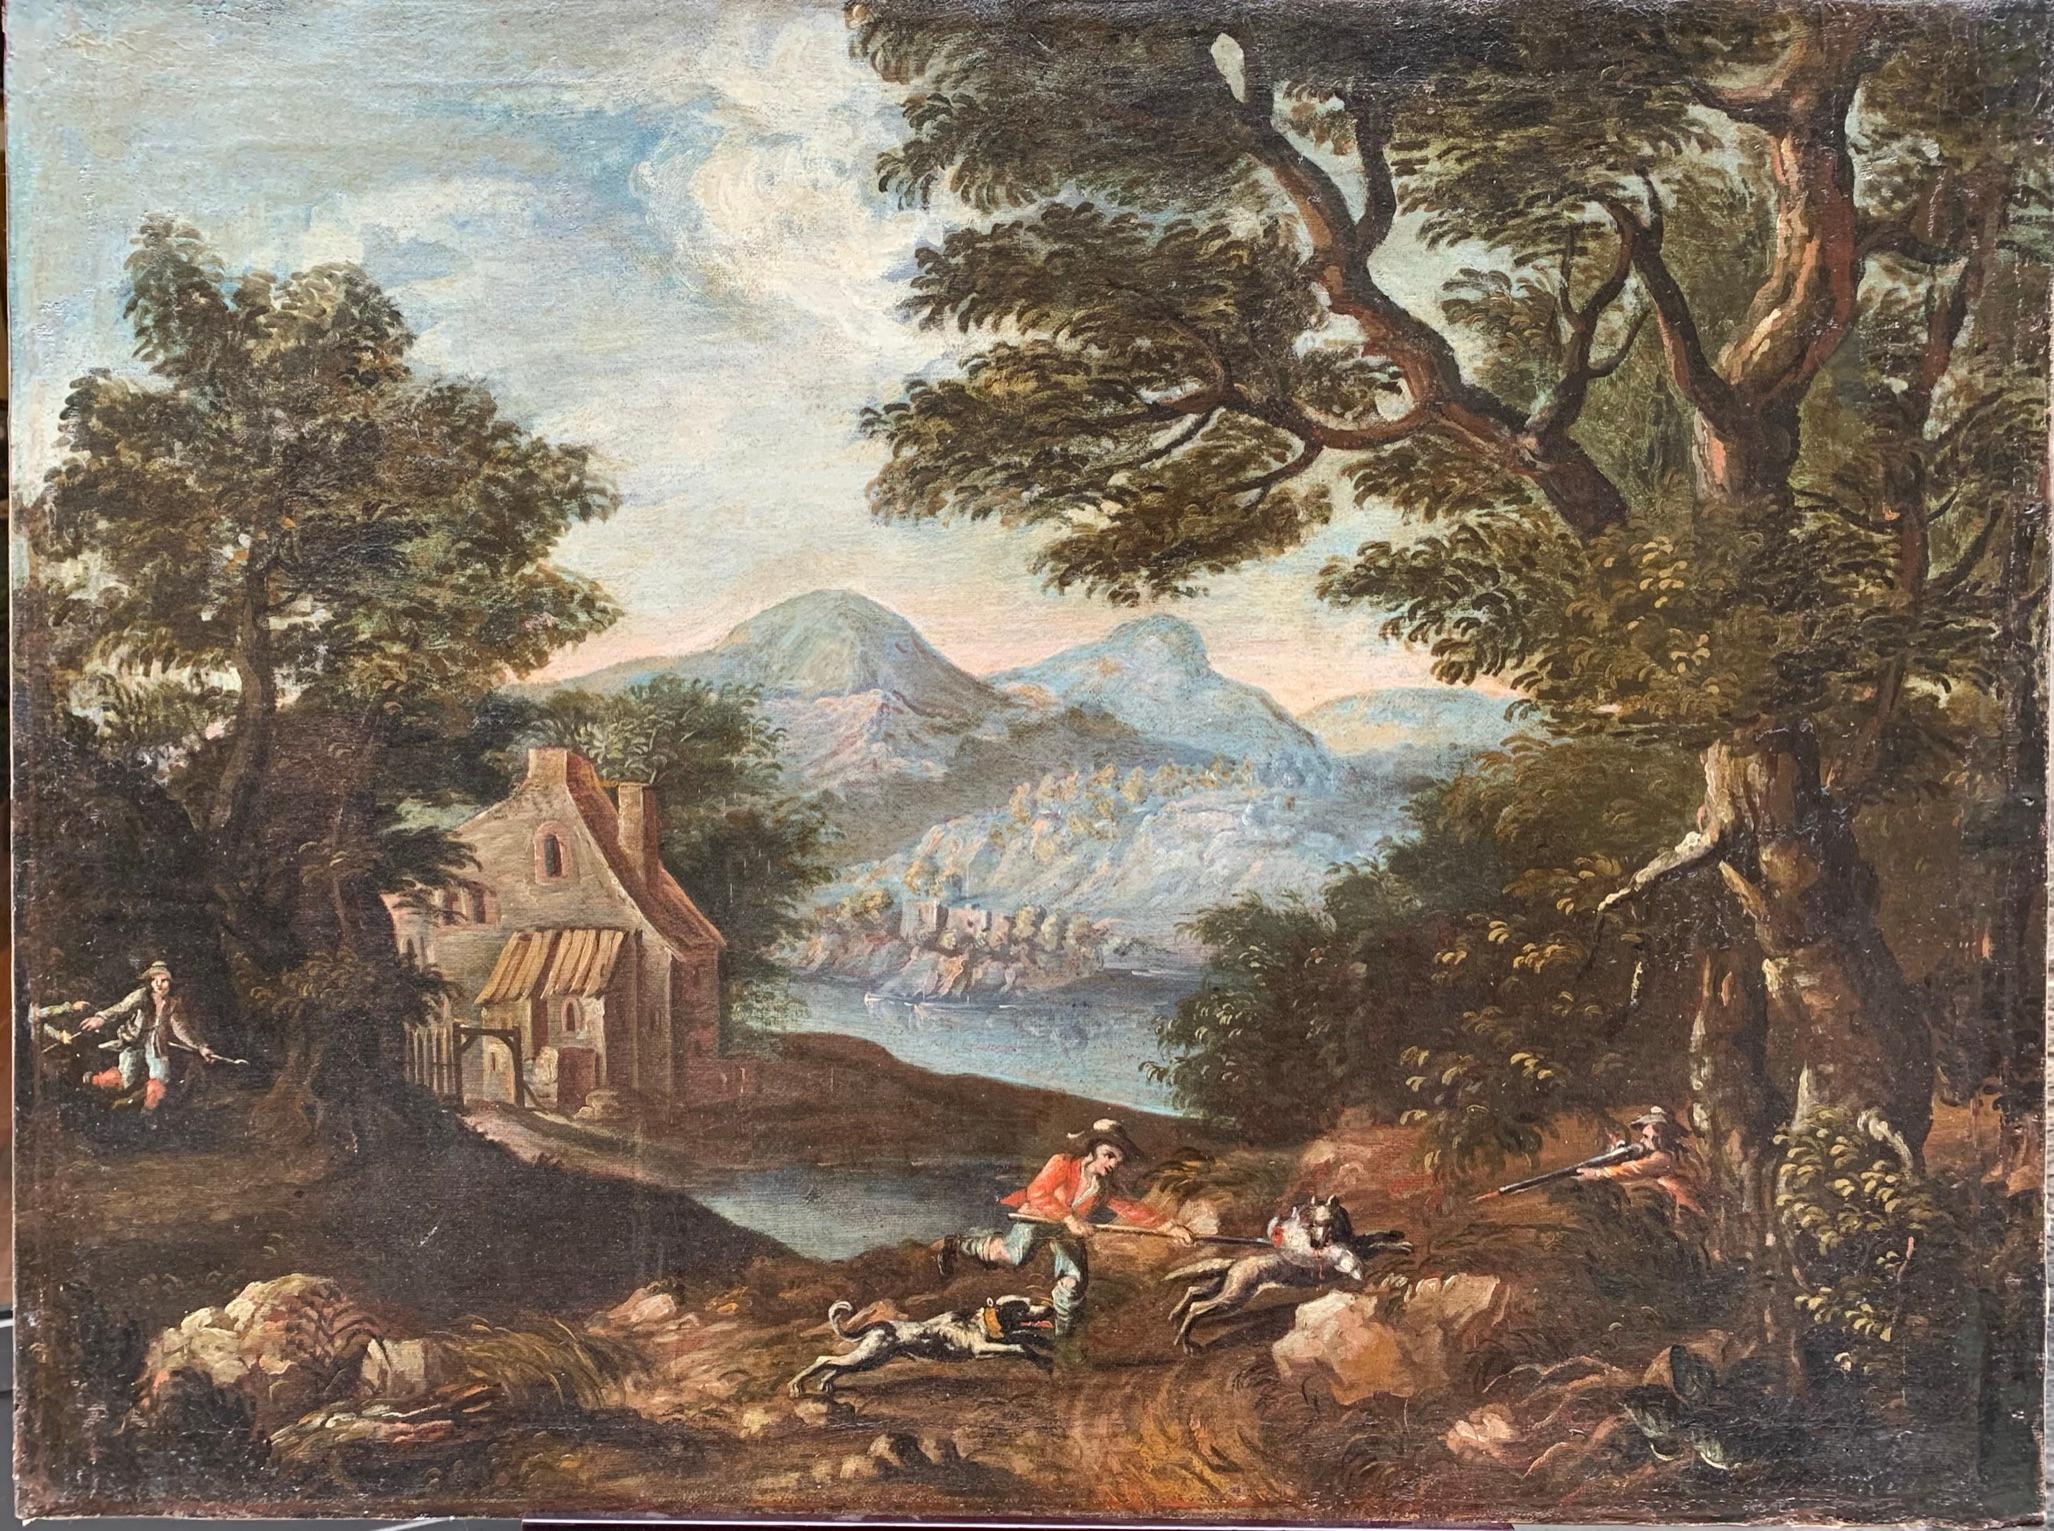 Landscape With Hunters By A Lake. 18th Century. - Painting by Unknown